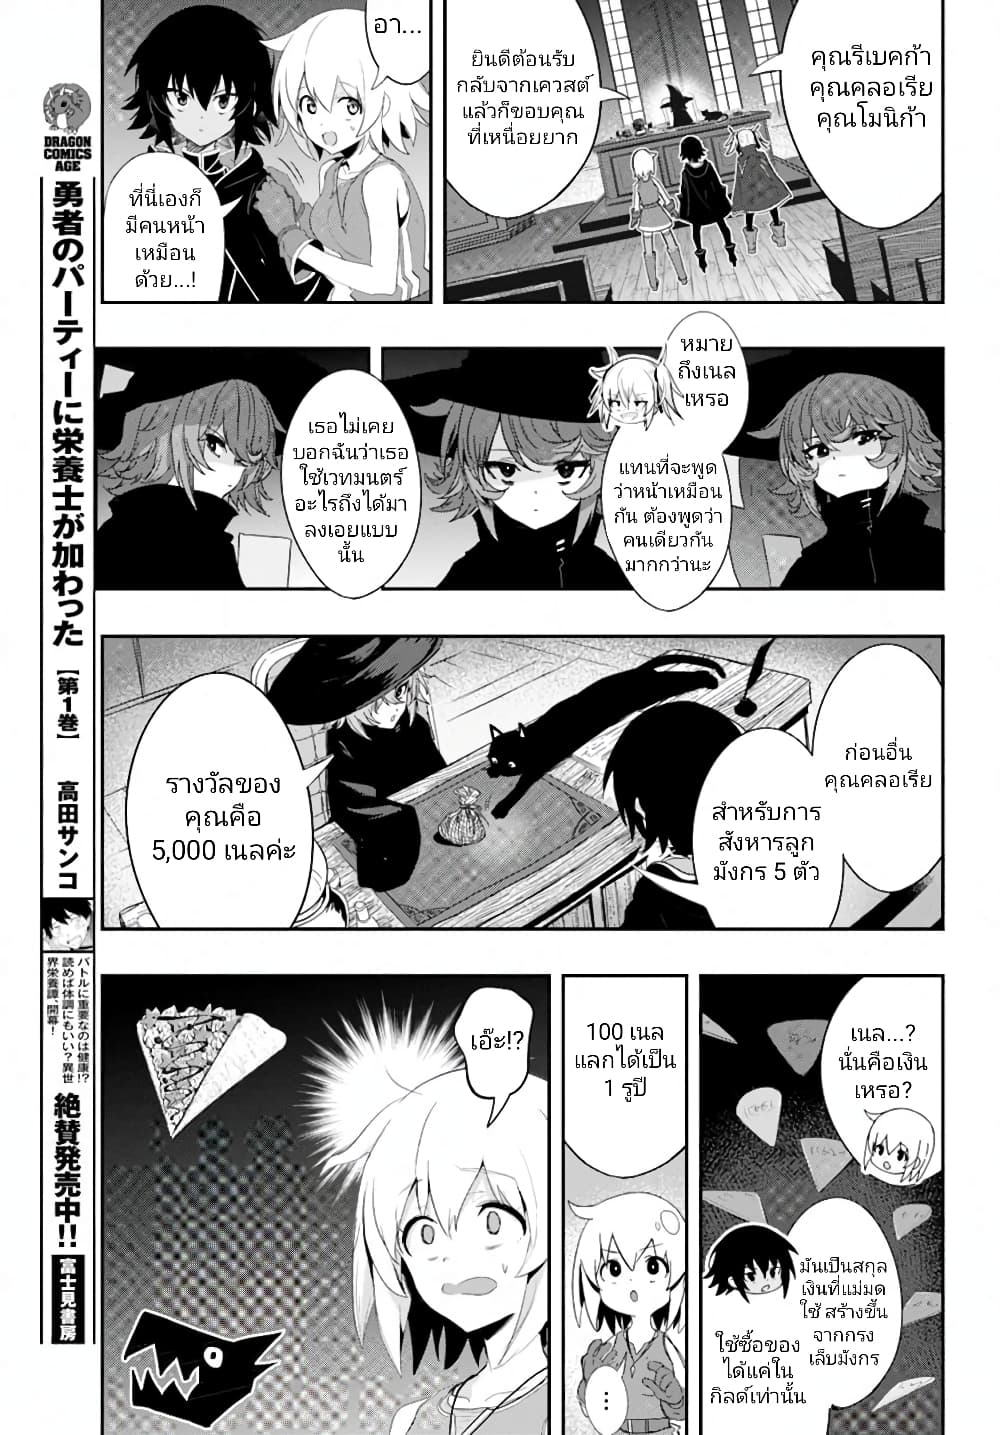 Witch Guild Fantasia 5 (12)